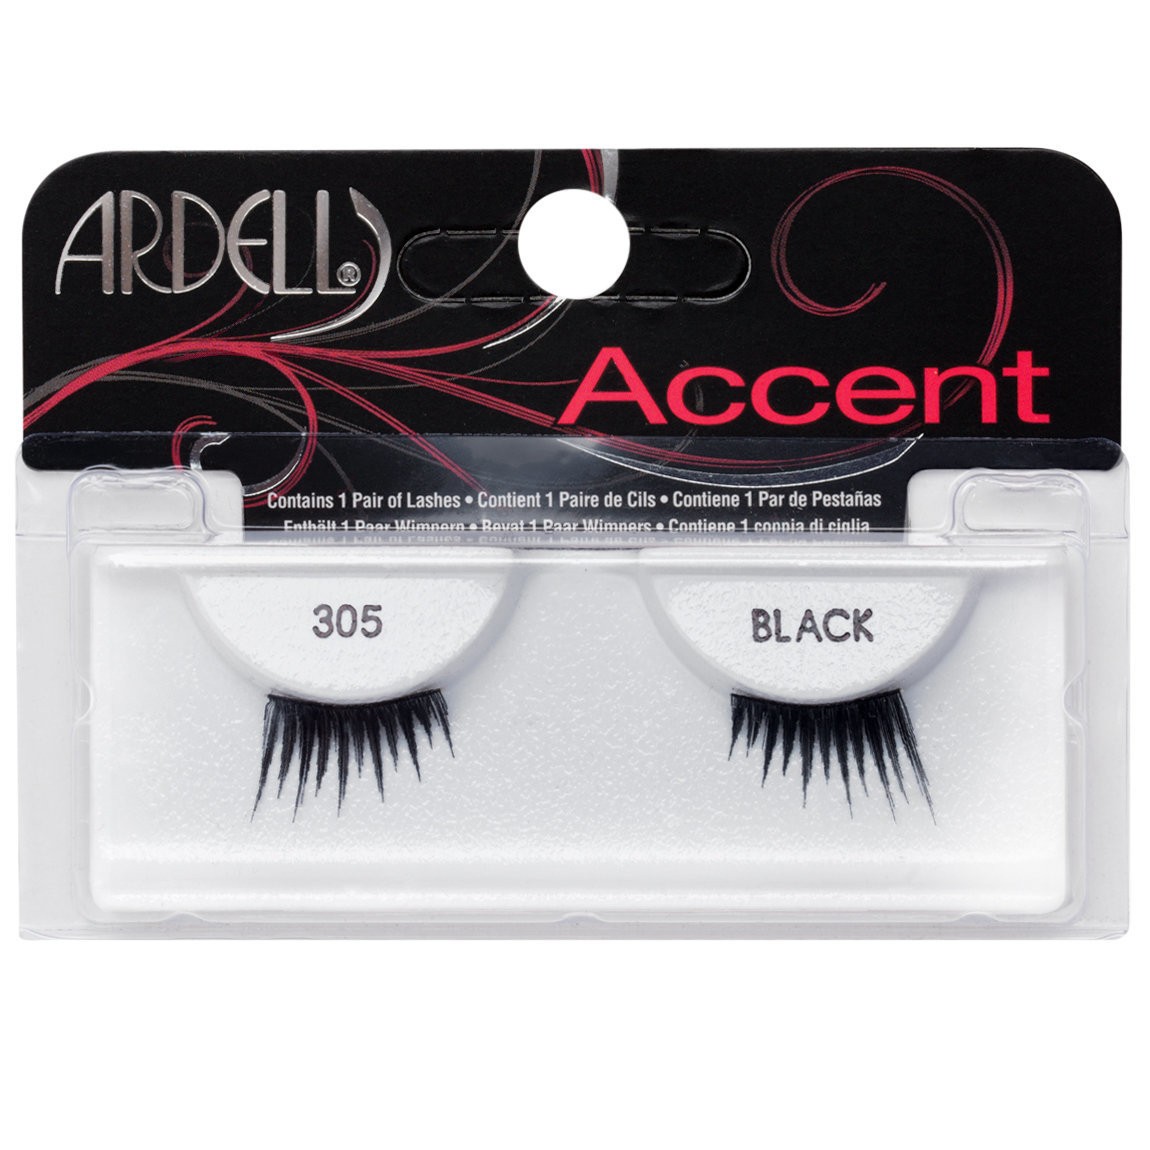 Ardell Accent 305 Black